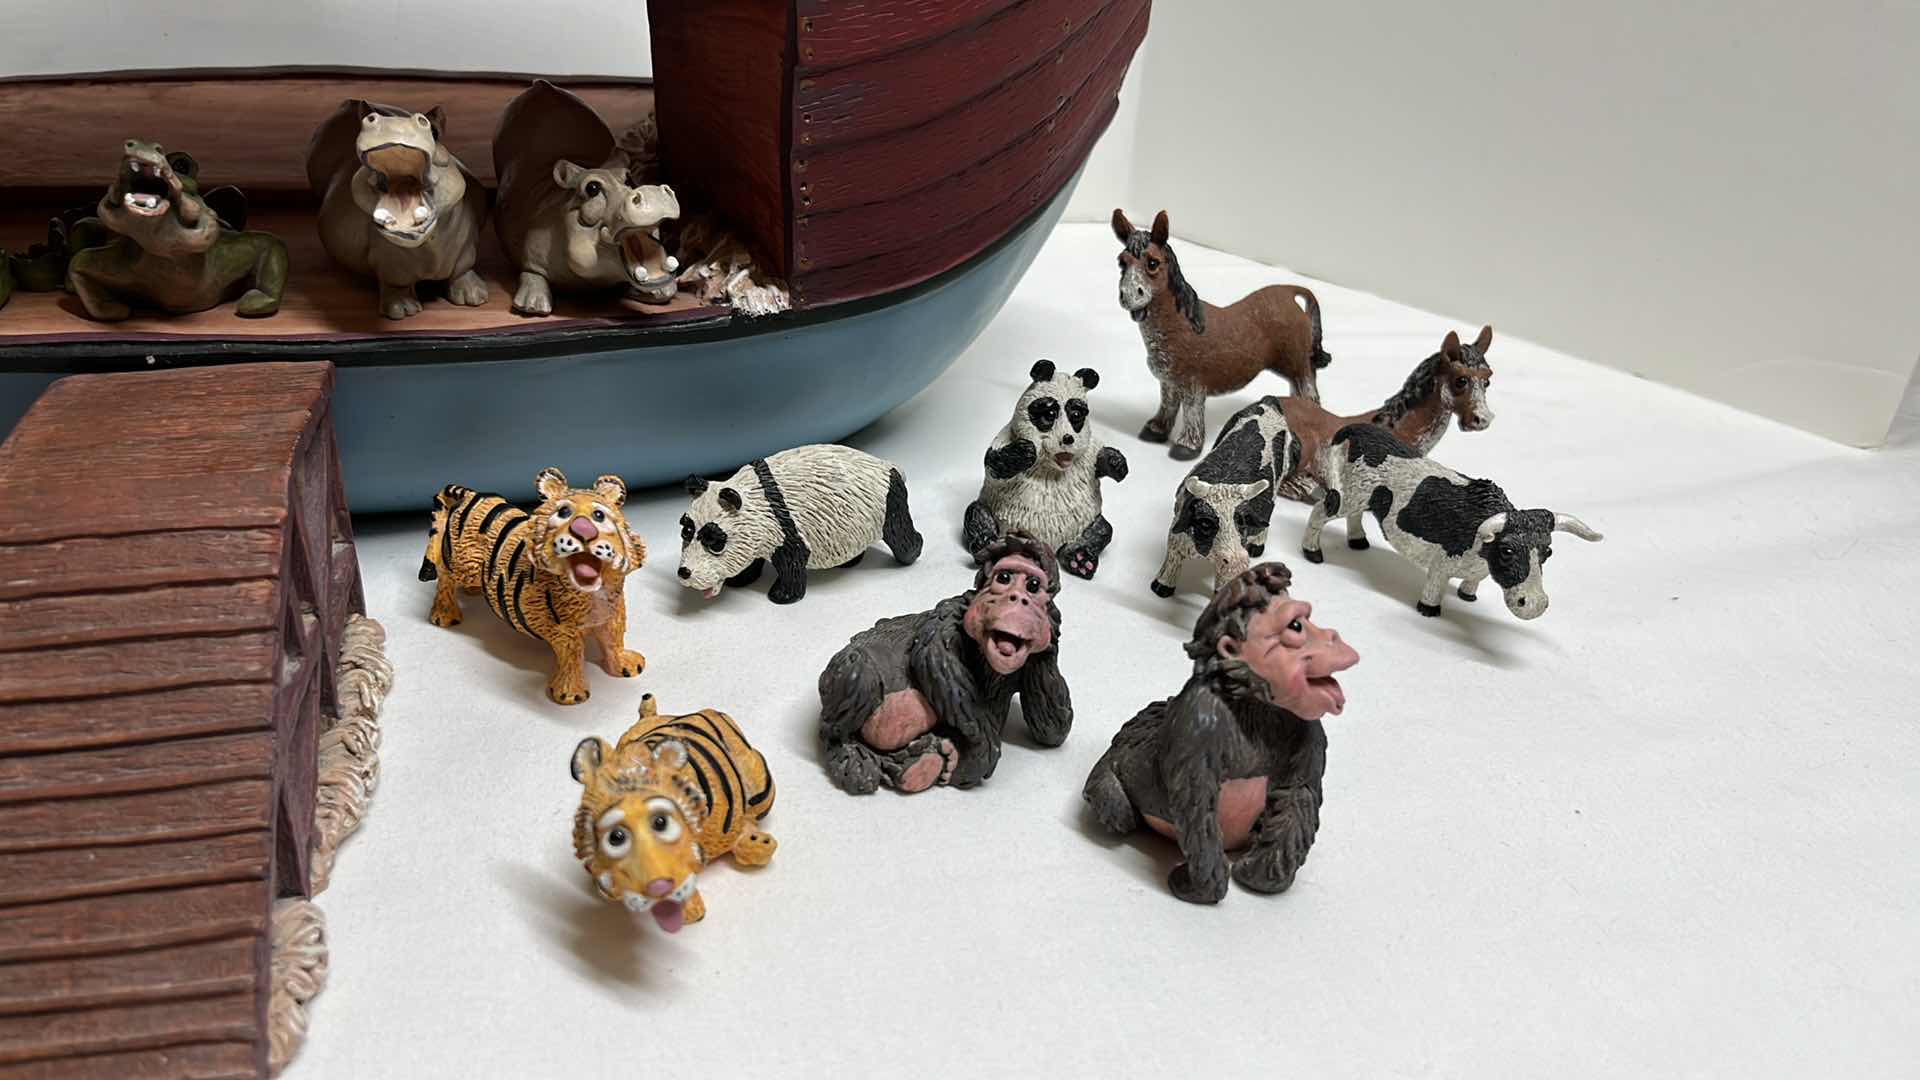 Photo 5 of NOAH’S ARK S.S. HOLY HERD COLLECTIBLES W NOAH & HIS WIFE & 34 ANIMAL FIGURINES 8.25” X 18.5” H12.5”